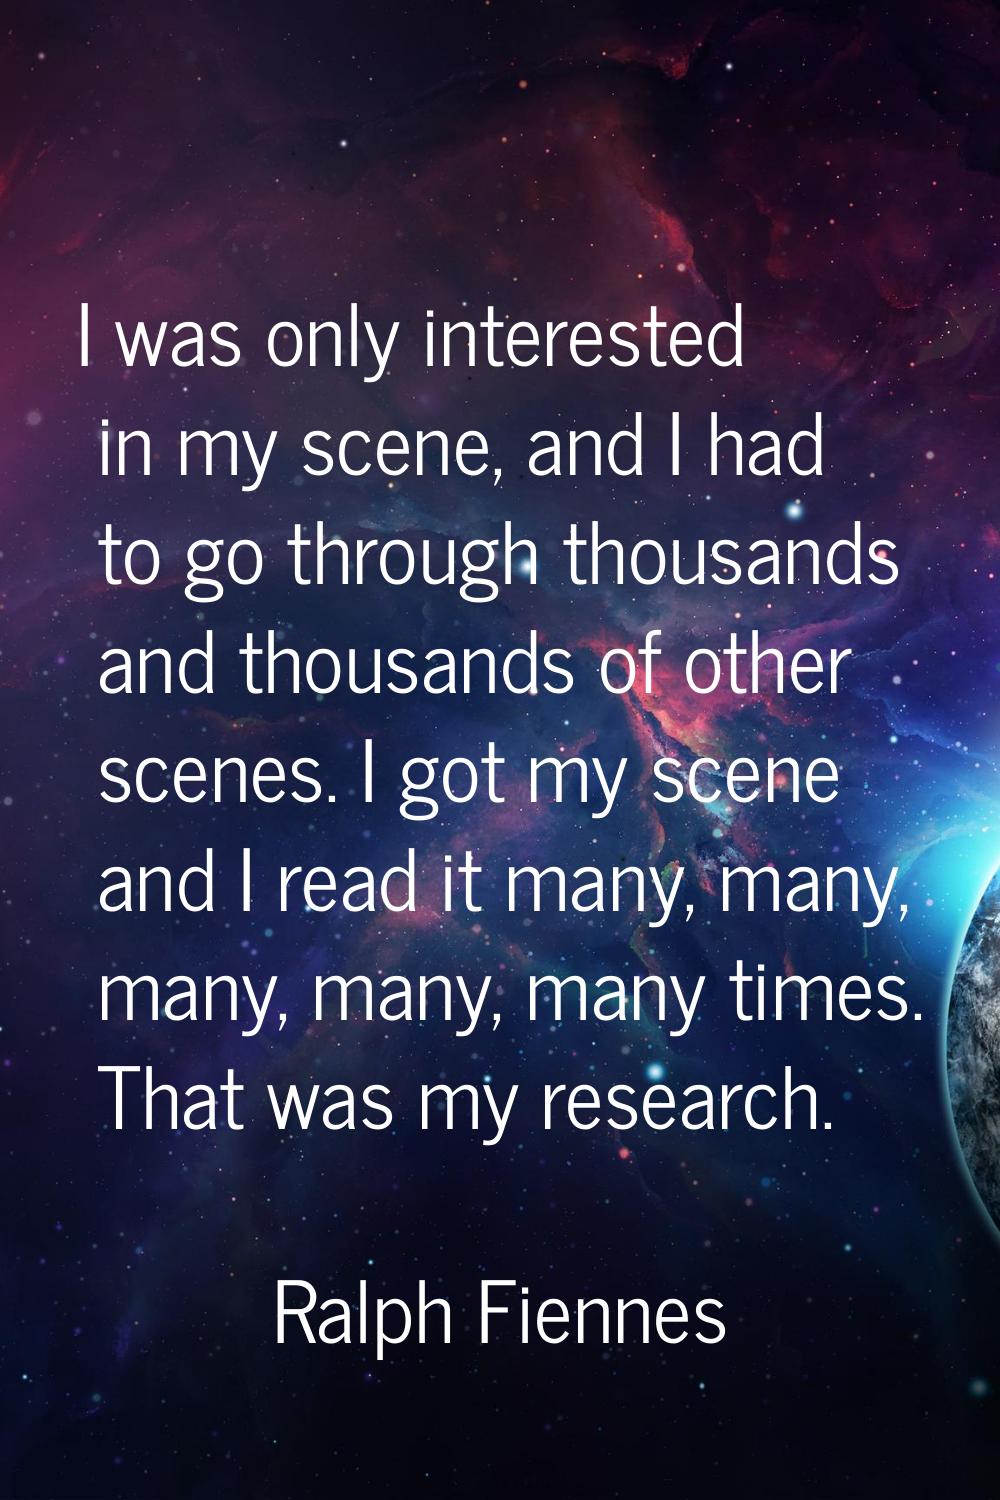 I was only interested in my scene, and I had to go through thousands and thousands of other scenes.